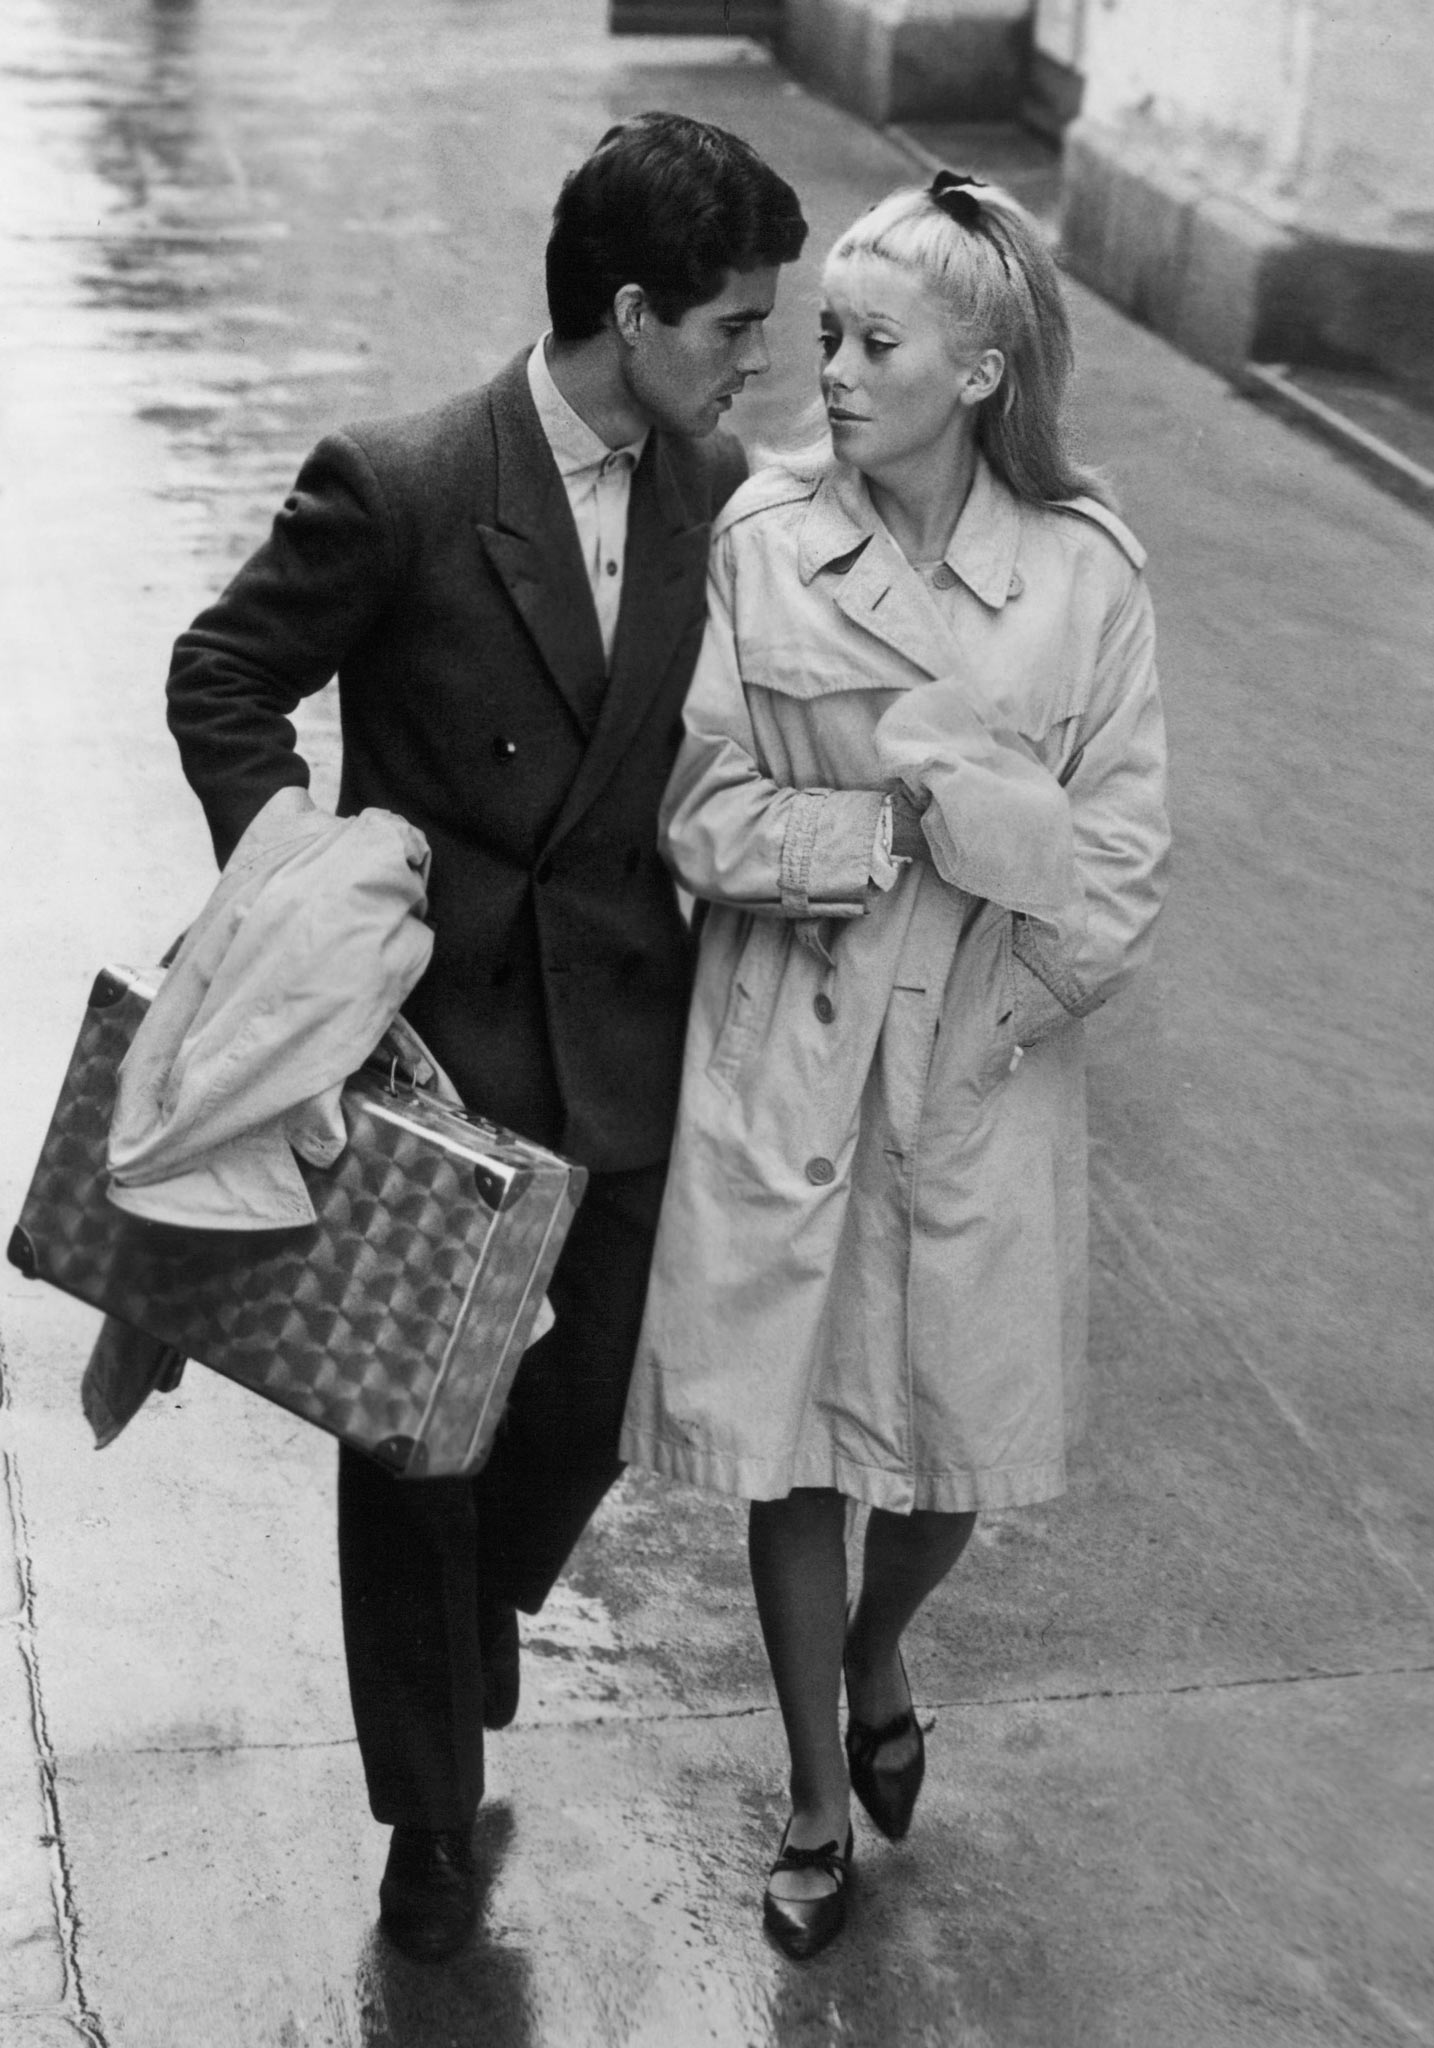 The Umbrellas of Cherbourg (1964) before